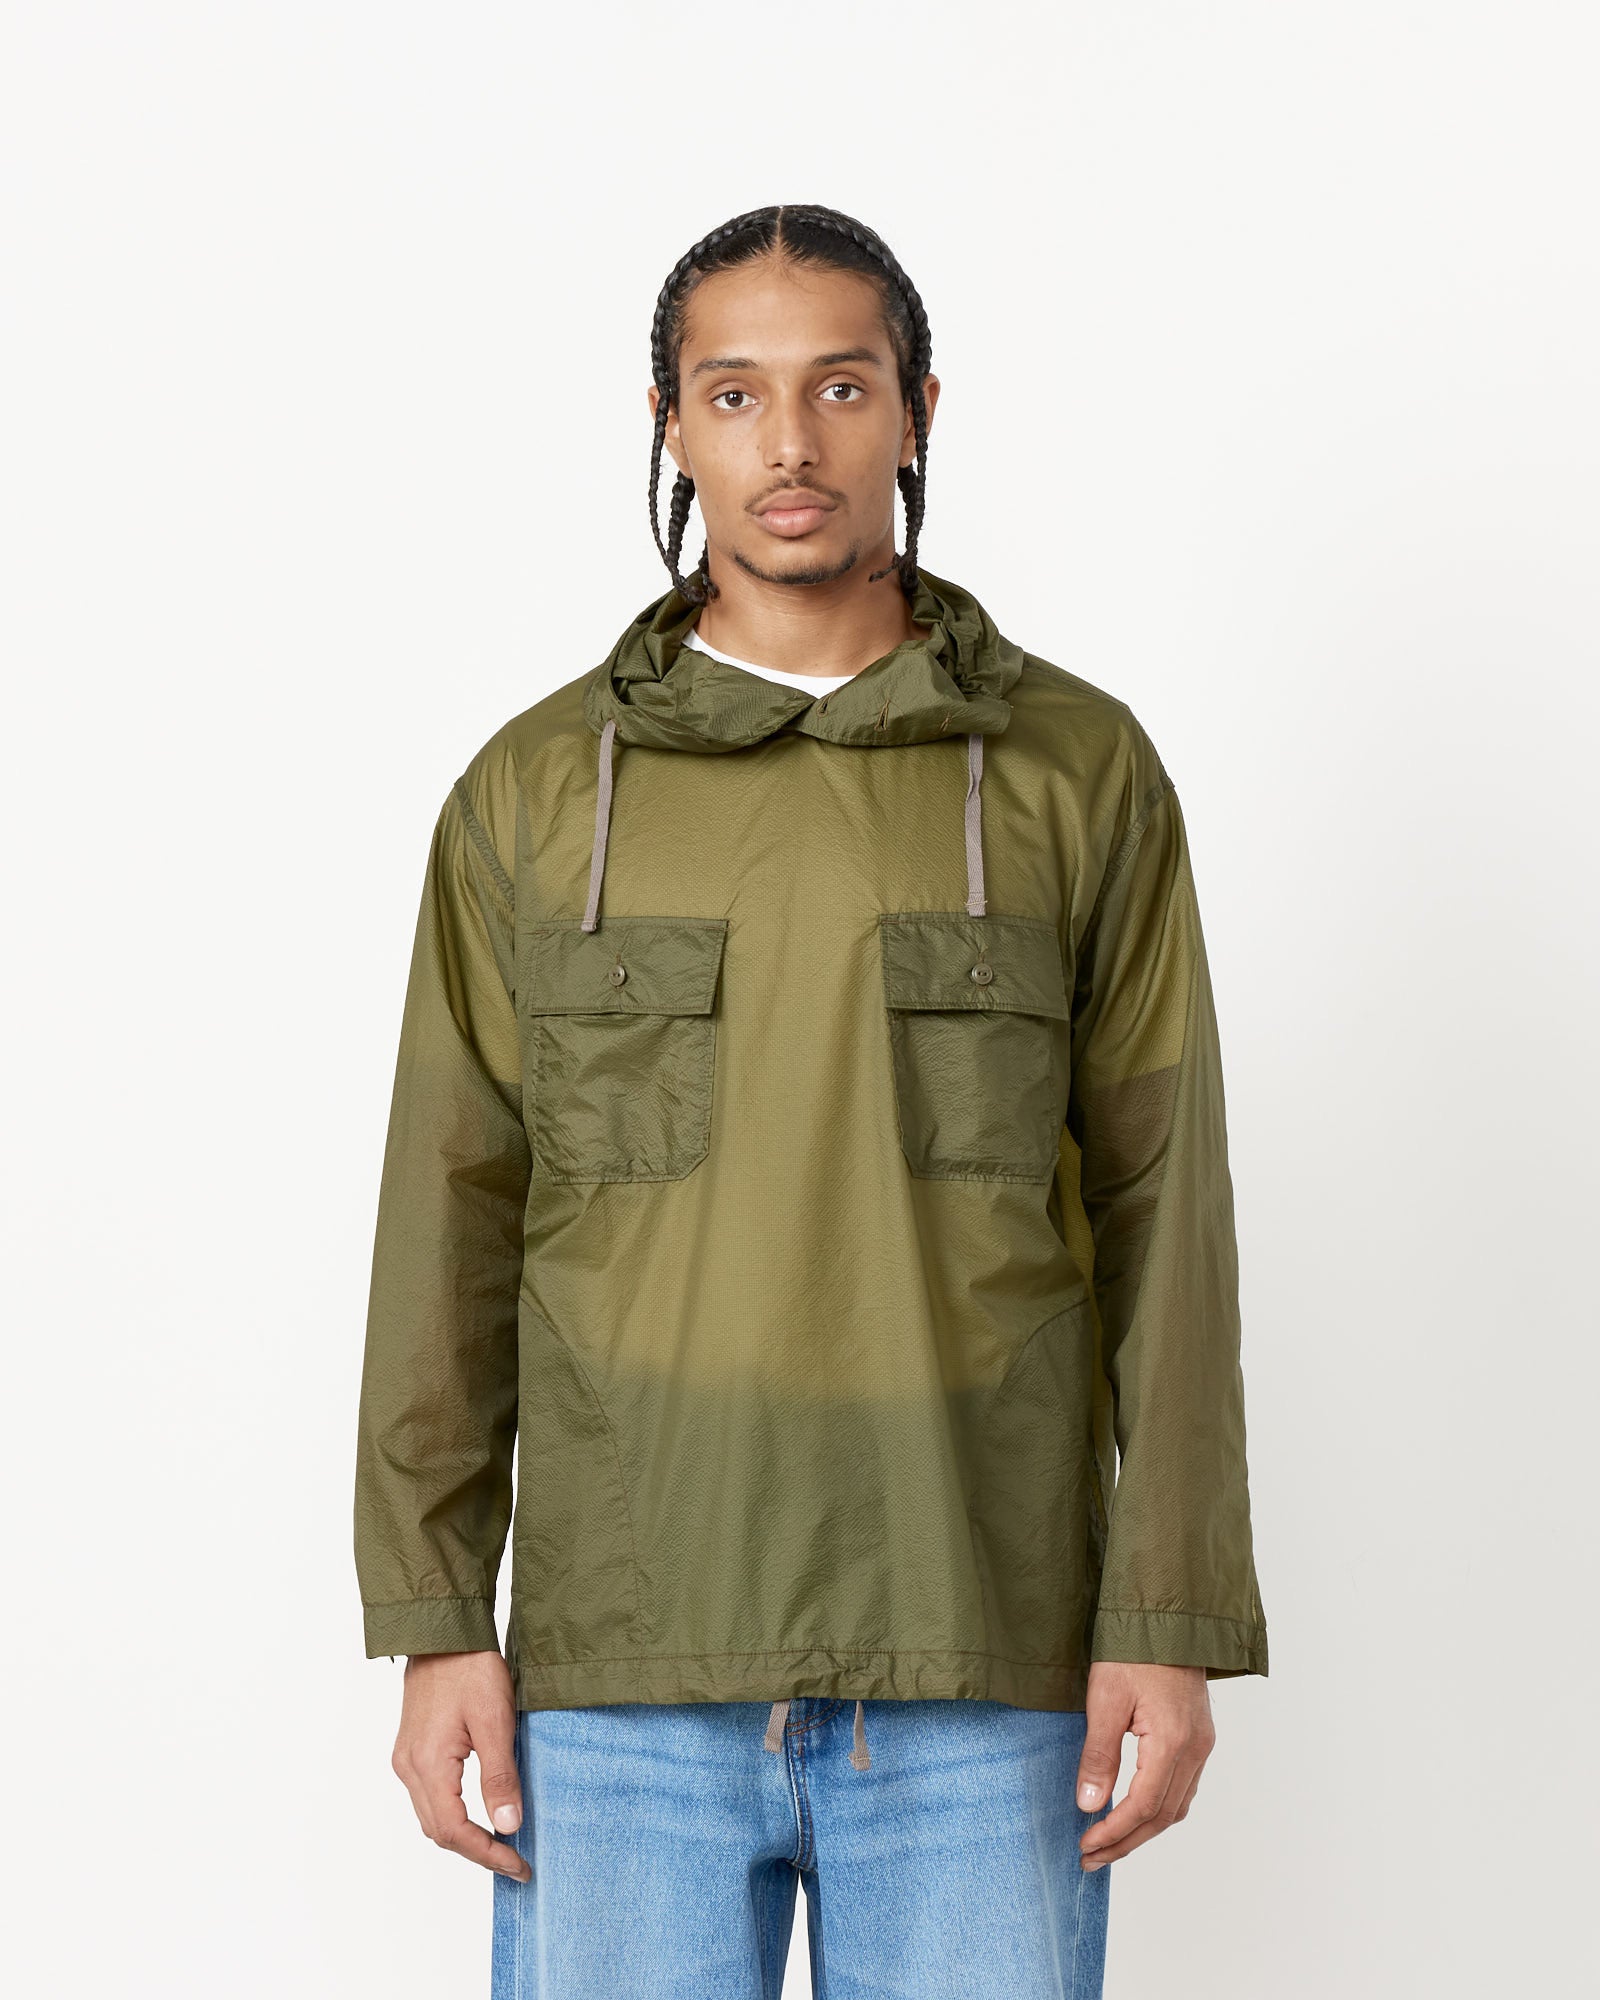 Cagoule Shirt in Olive